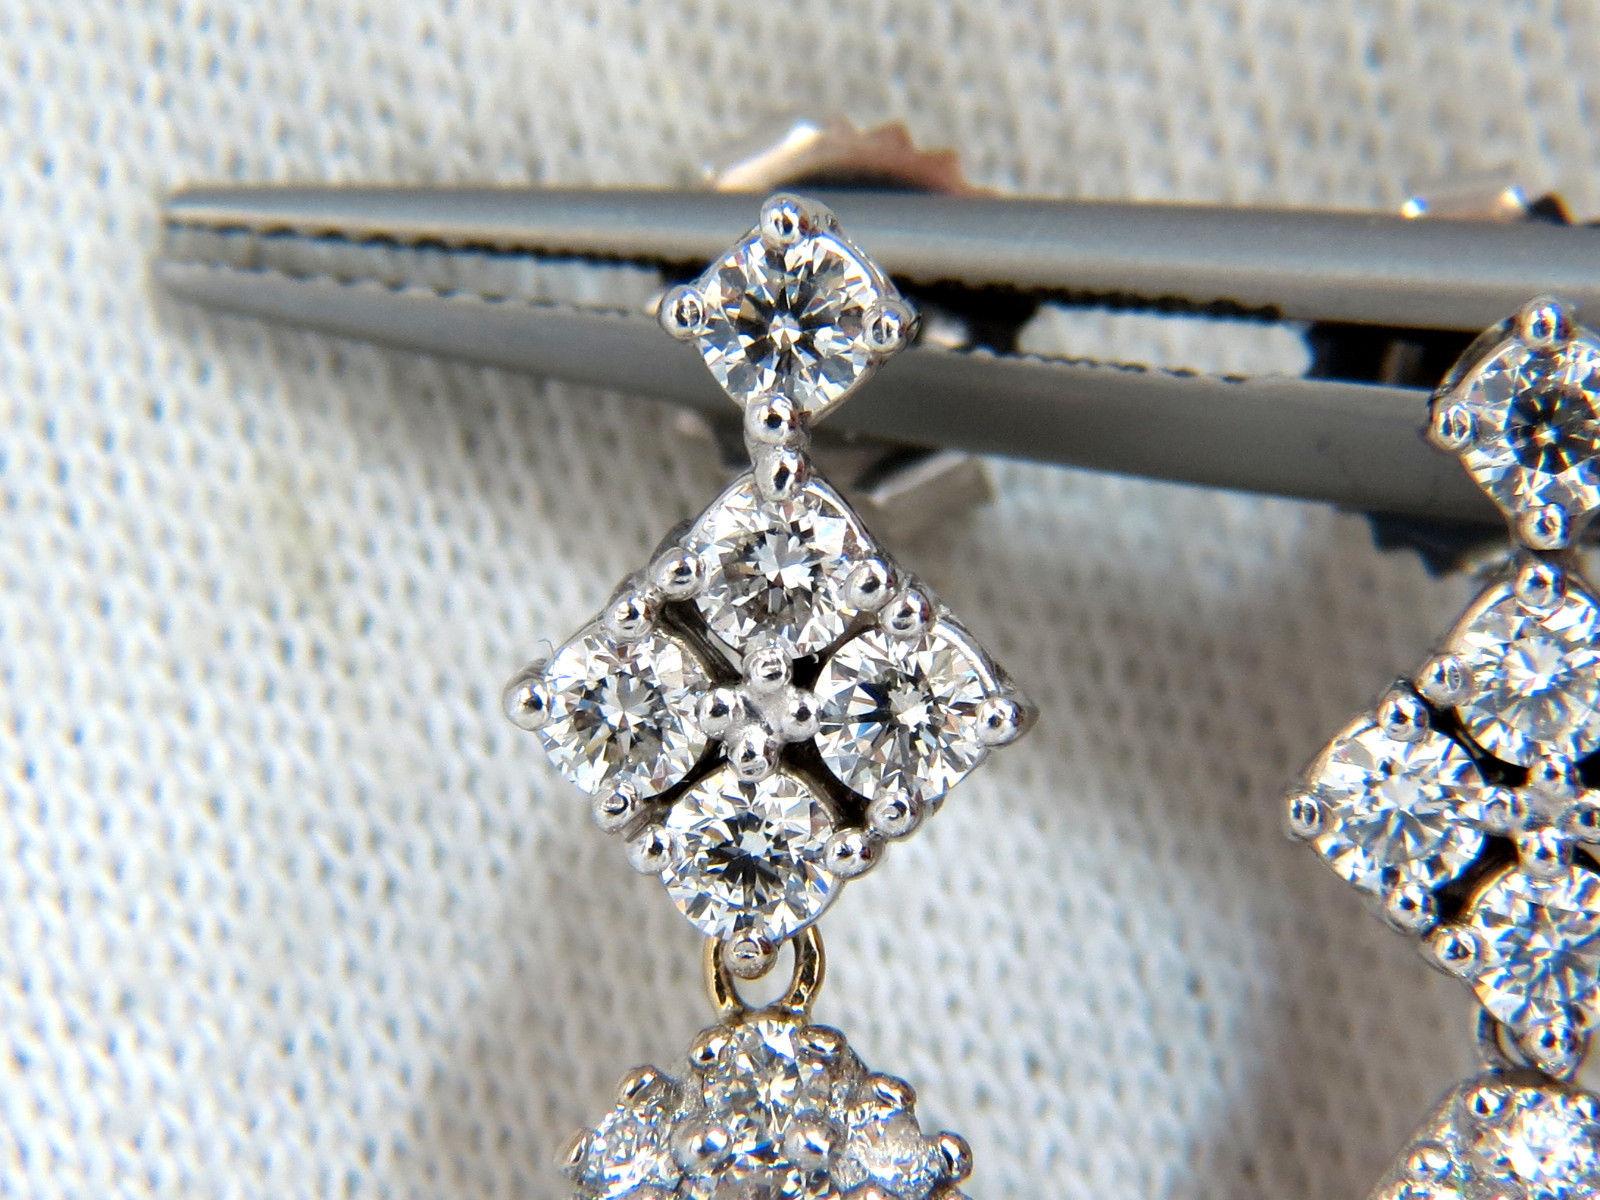 Pear Cluster Dangle earrings.

The Victorian Revival.

6.50cts of natural round diamonds: 

G-color, Vs-2 clarity.

14kt. white gold

11.1 grams.

Earrings measure: 33mm long (1.3 Inch)

12.7mm (.50 inch) diameter on lower larger